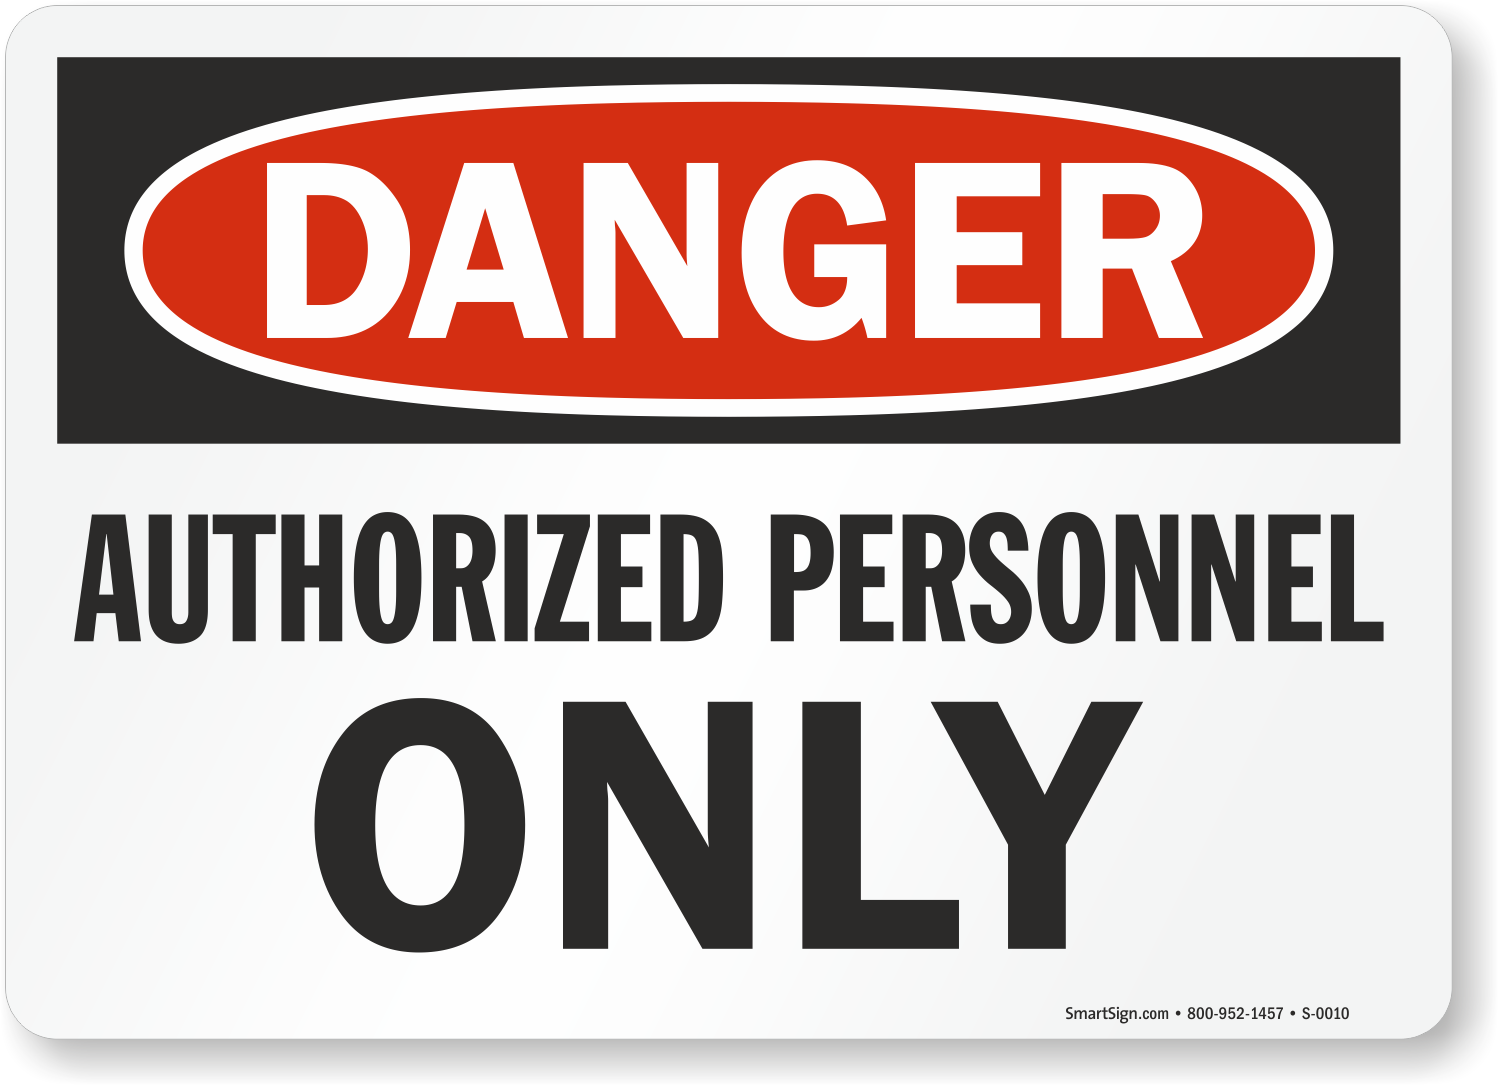 Authorized Personnel Only Danger Sign Made In USA, SKU S0010